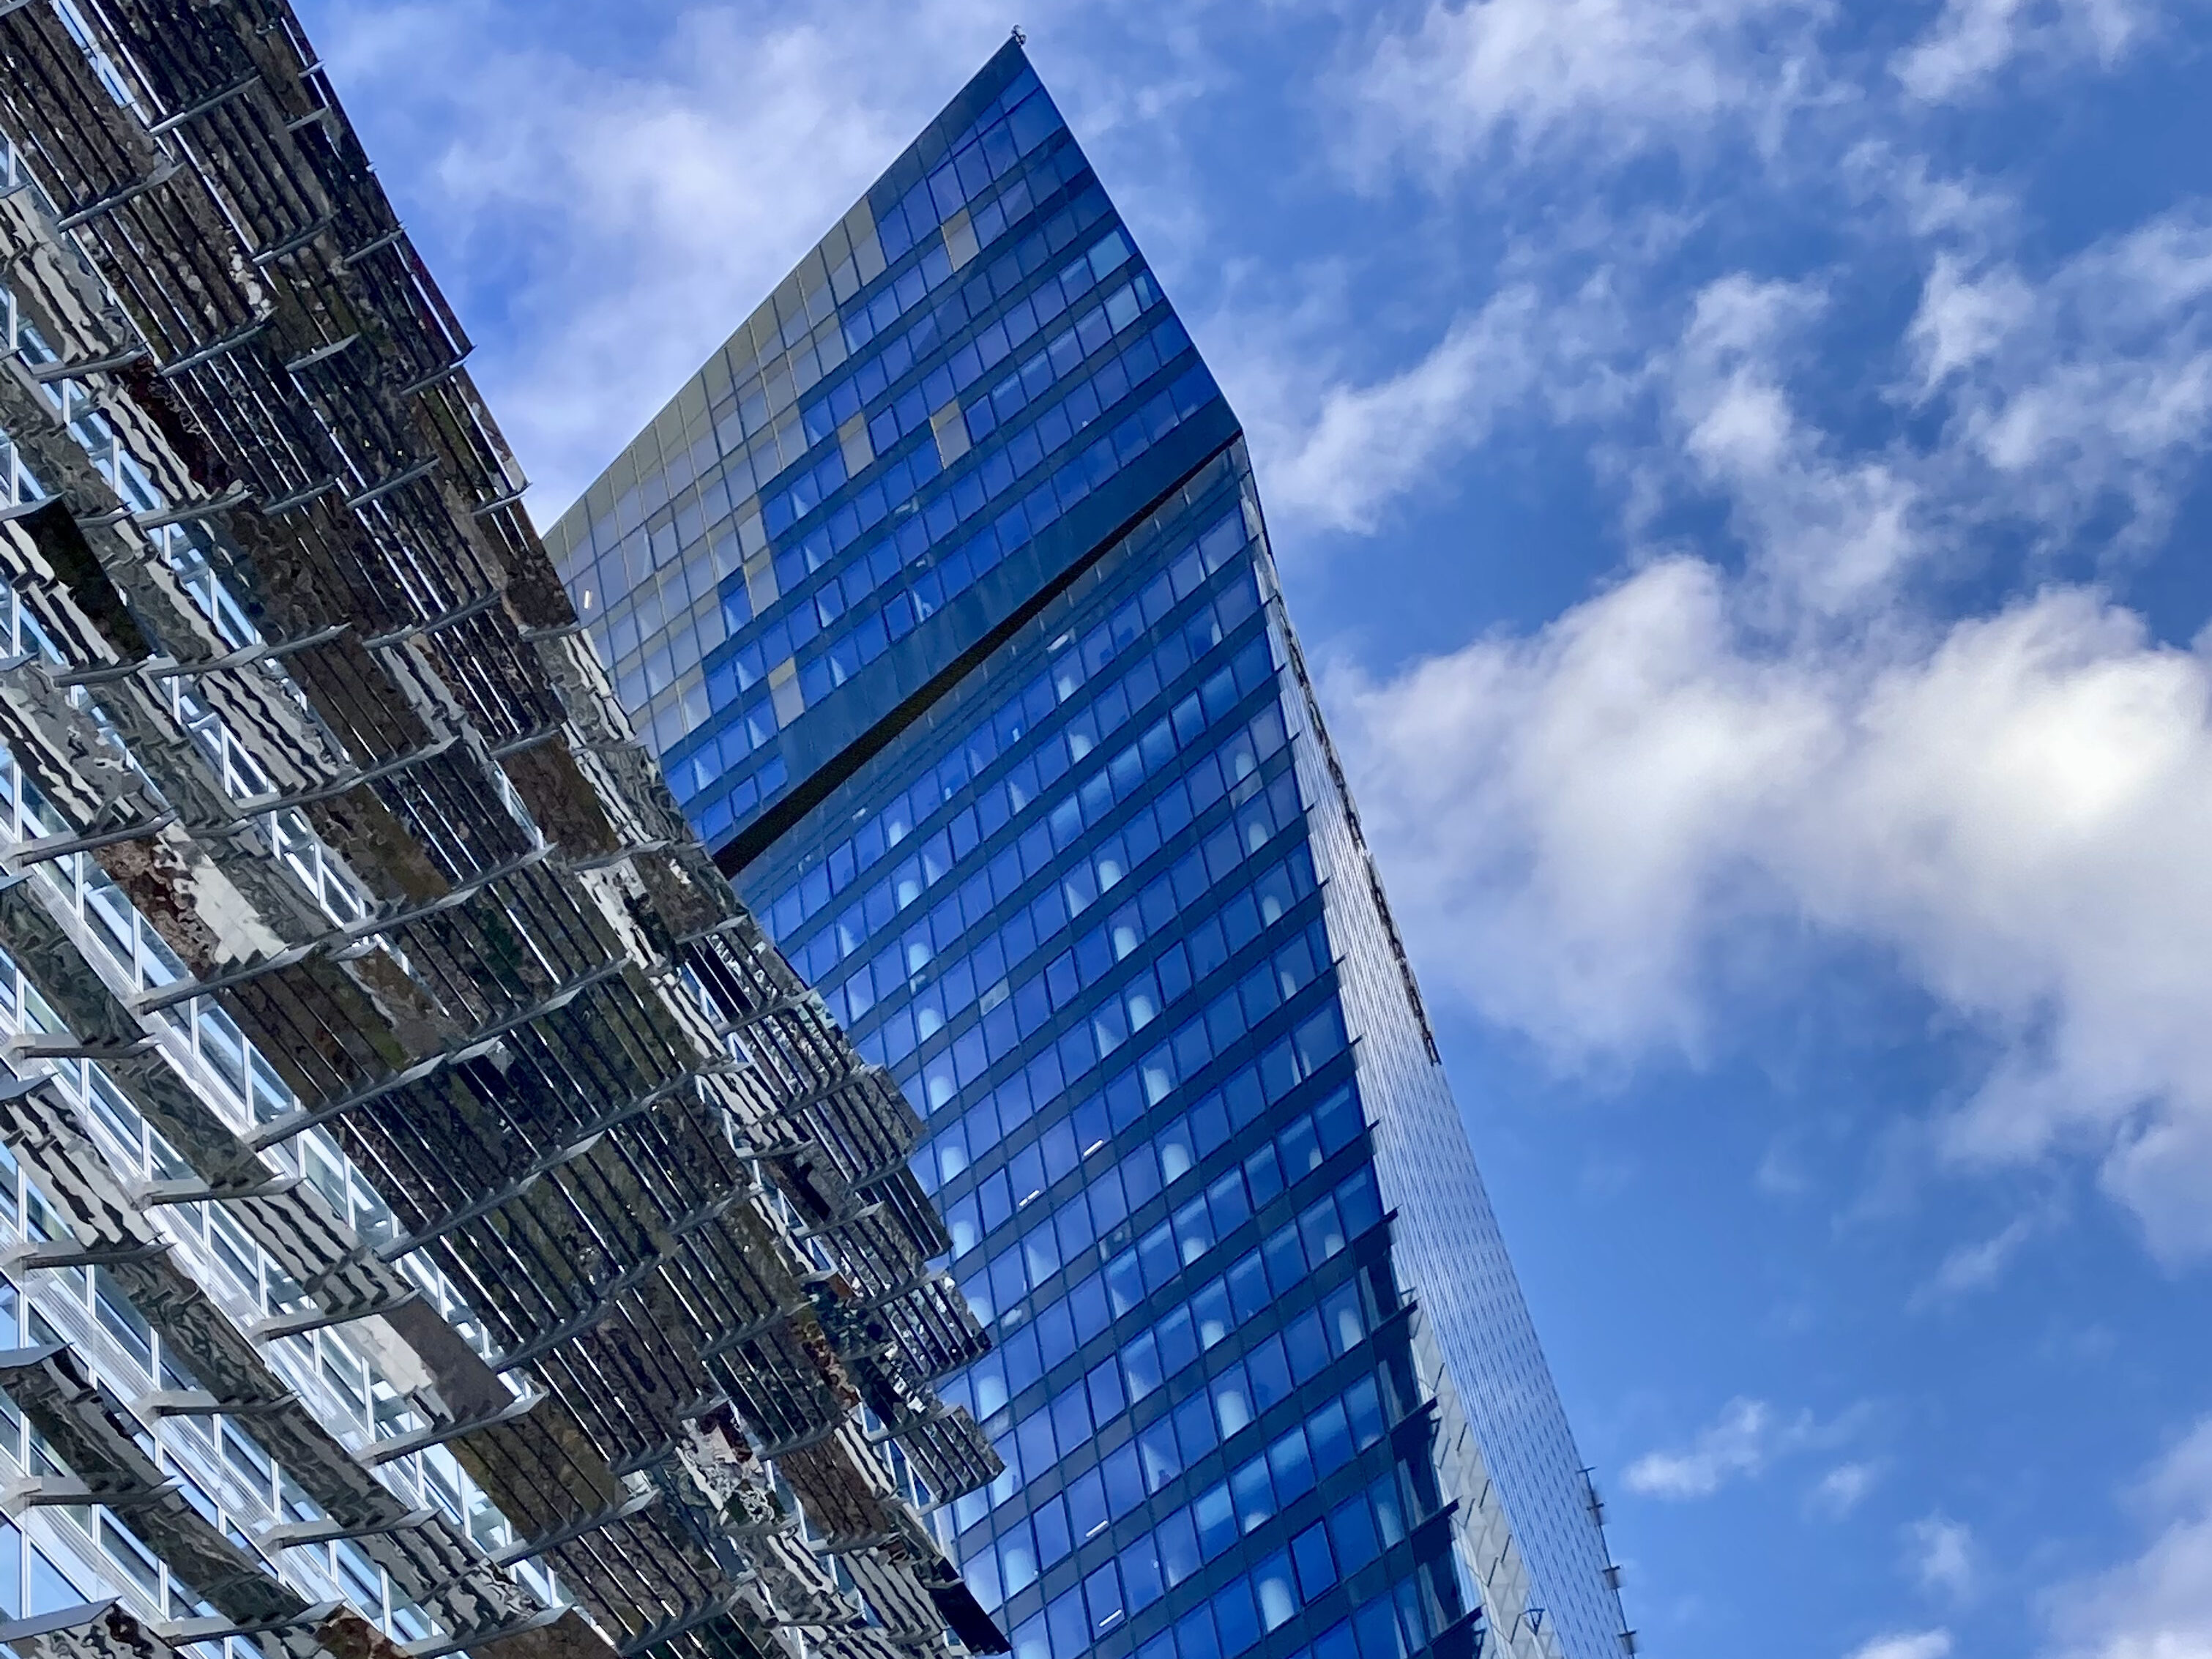 The blue sky reflecting off the Tours Duo towers by architect Jean Nouvel.